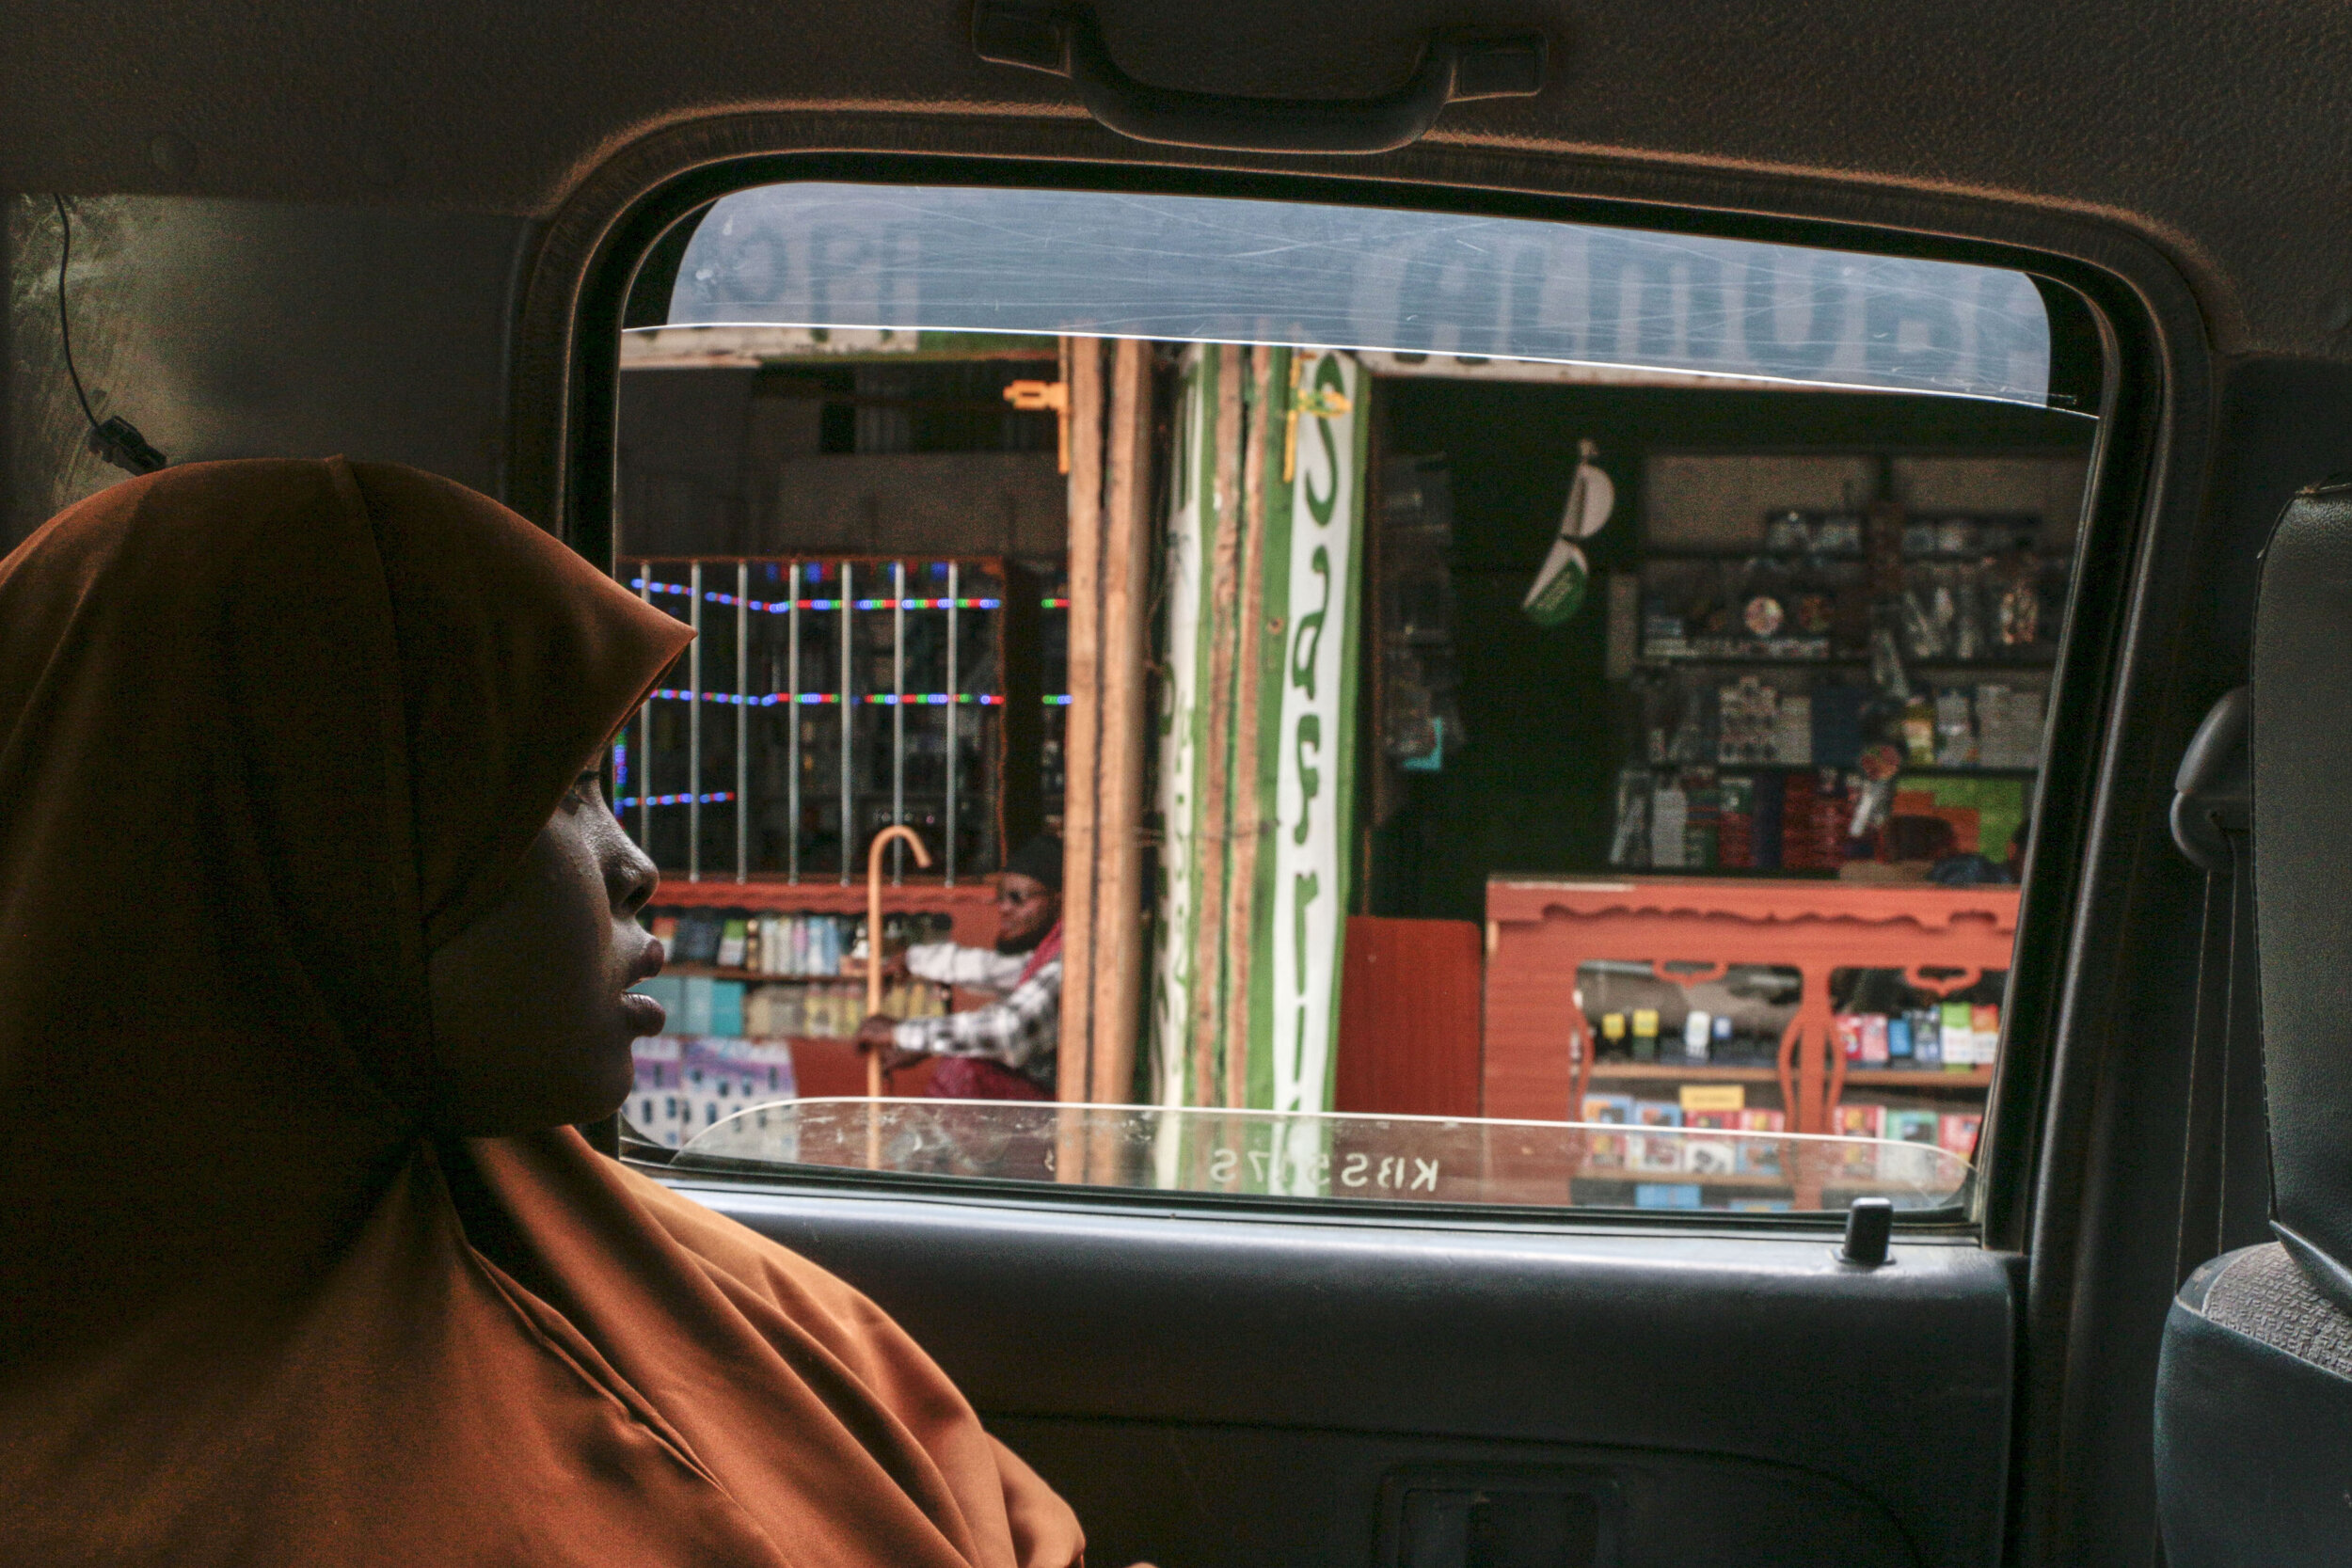  Hamdi Kosar looks out the window while driving through the marketplace Aug. 20 at the Dagahaley Refugee Camp in Dadaab, Kenya. Many refugees have their own business and sell goods at the market place within the camp. “It brings back memories,” Kosar